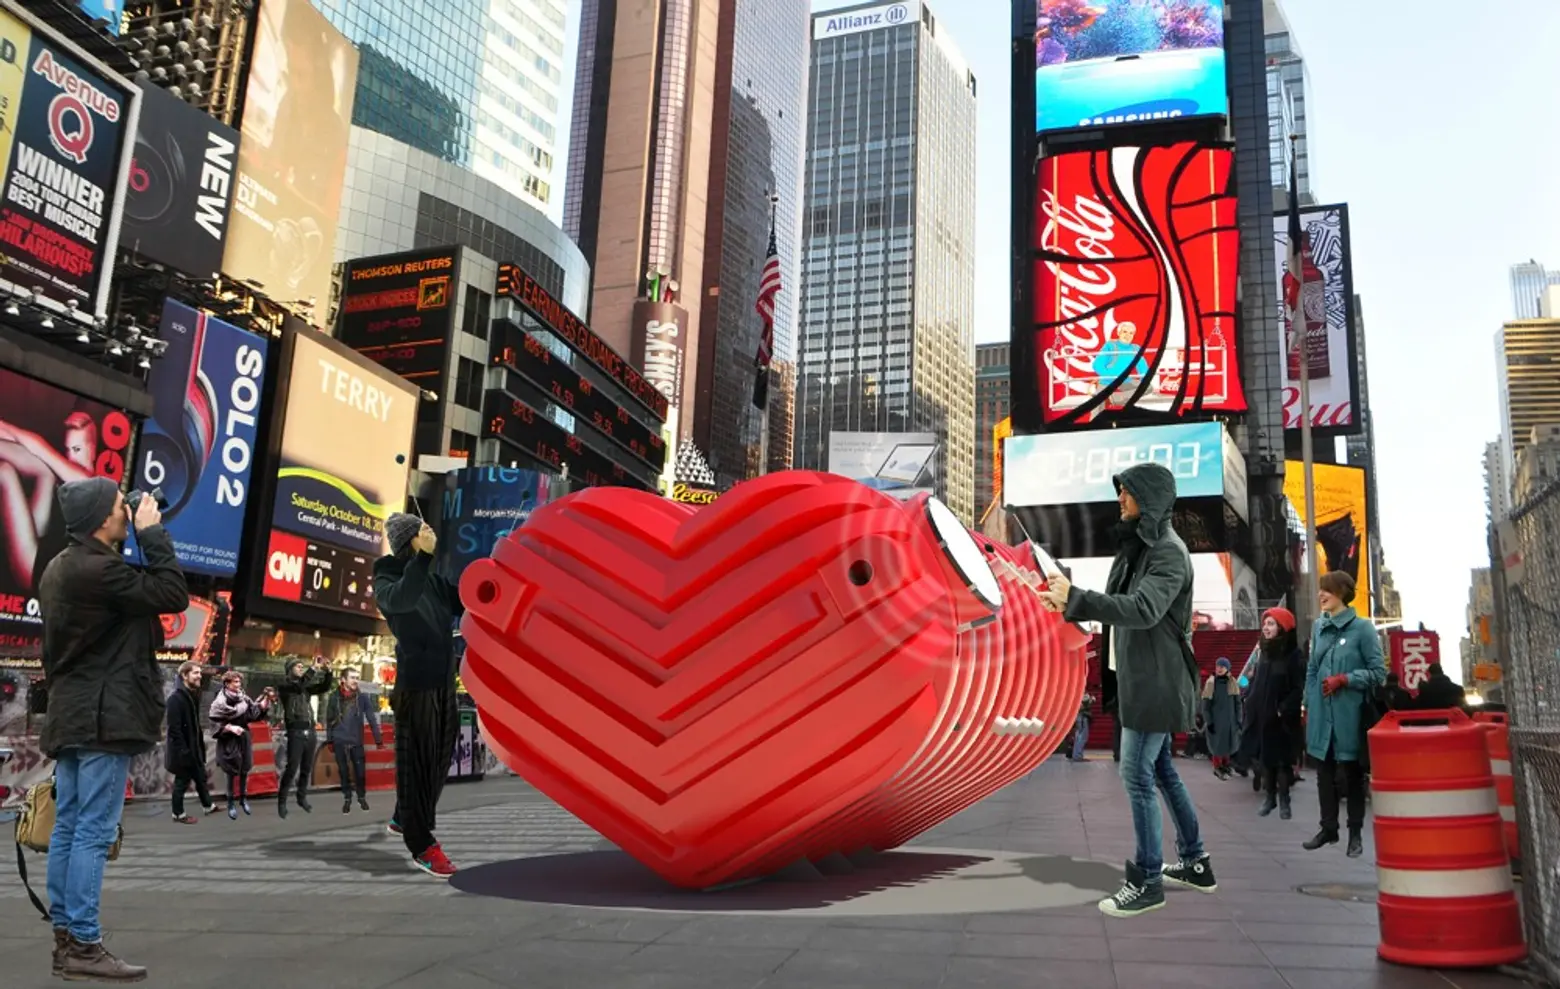 Stereotank, Heartbeat, Times Square, NYC public art